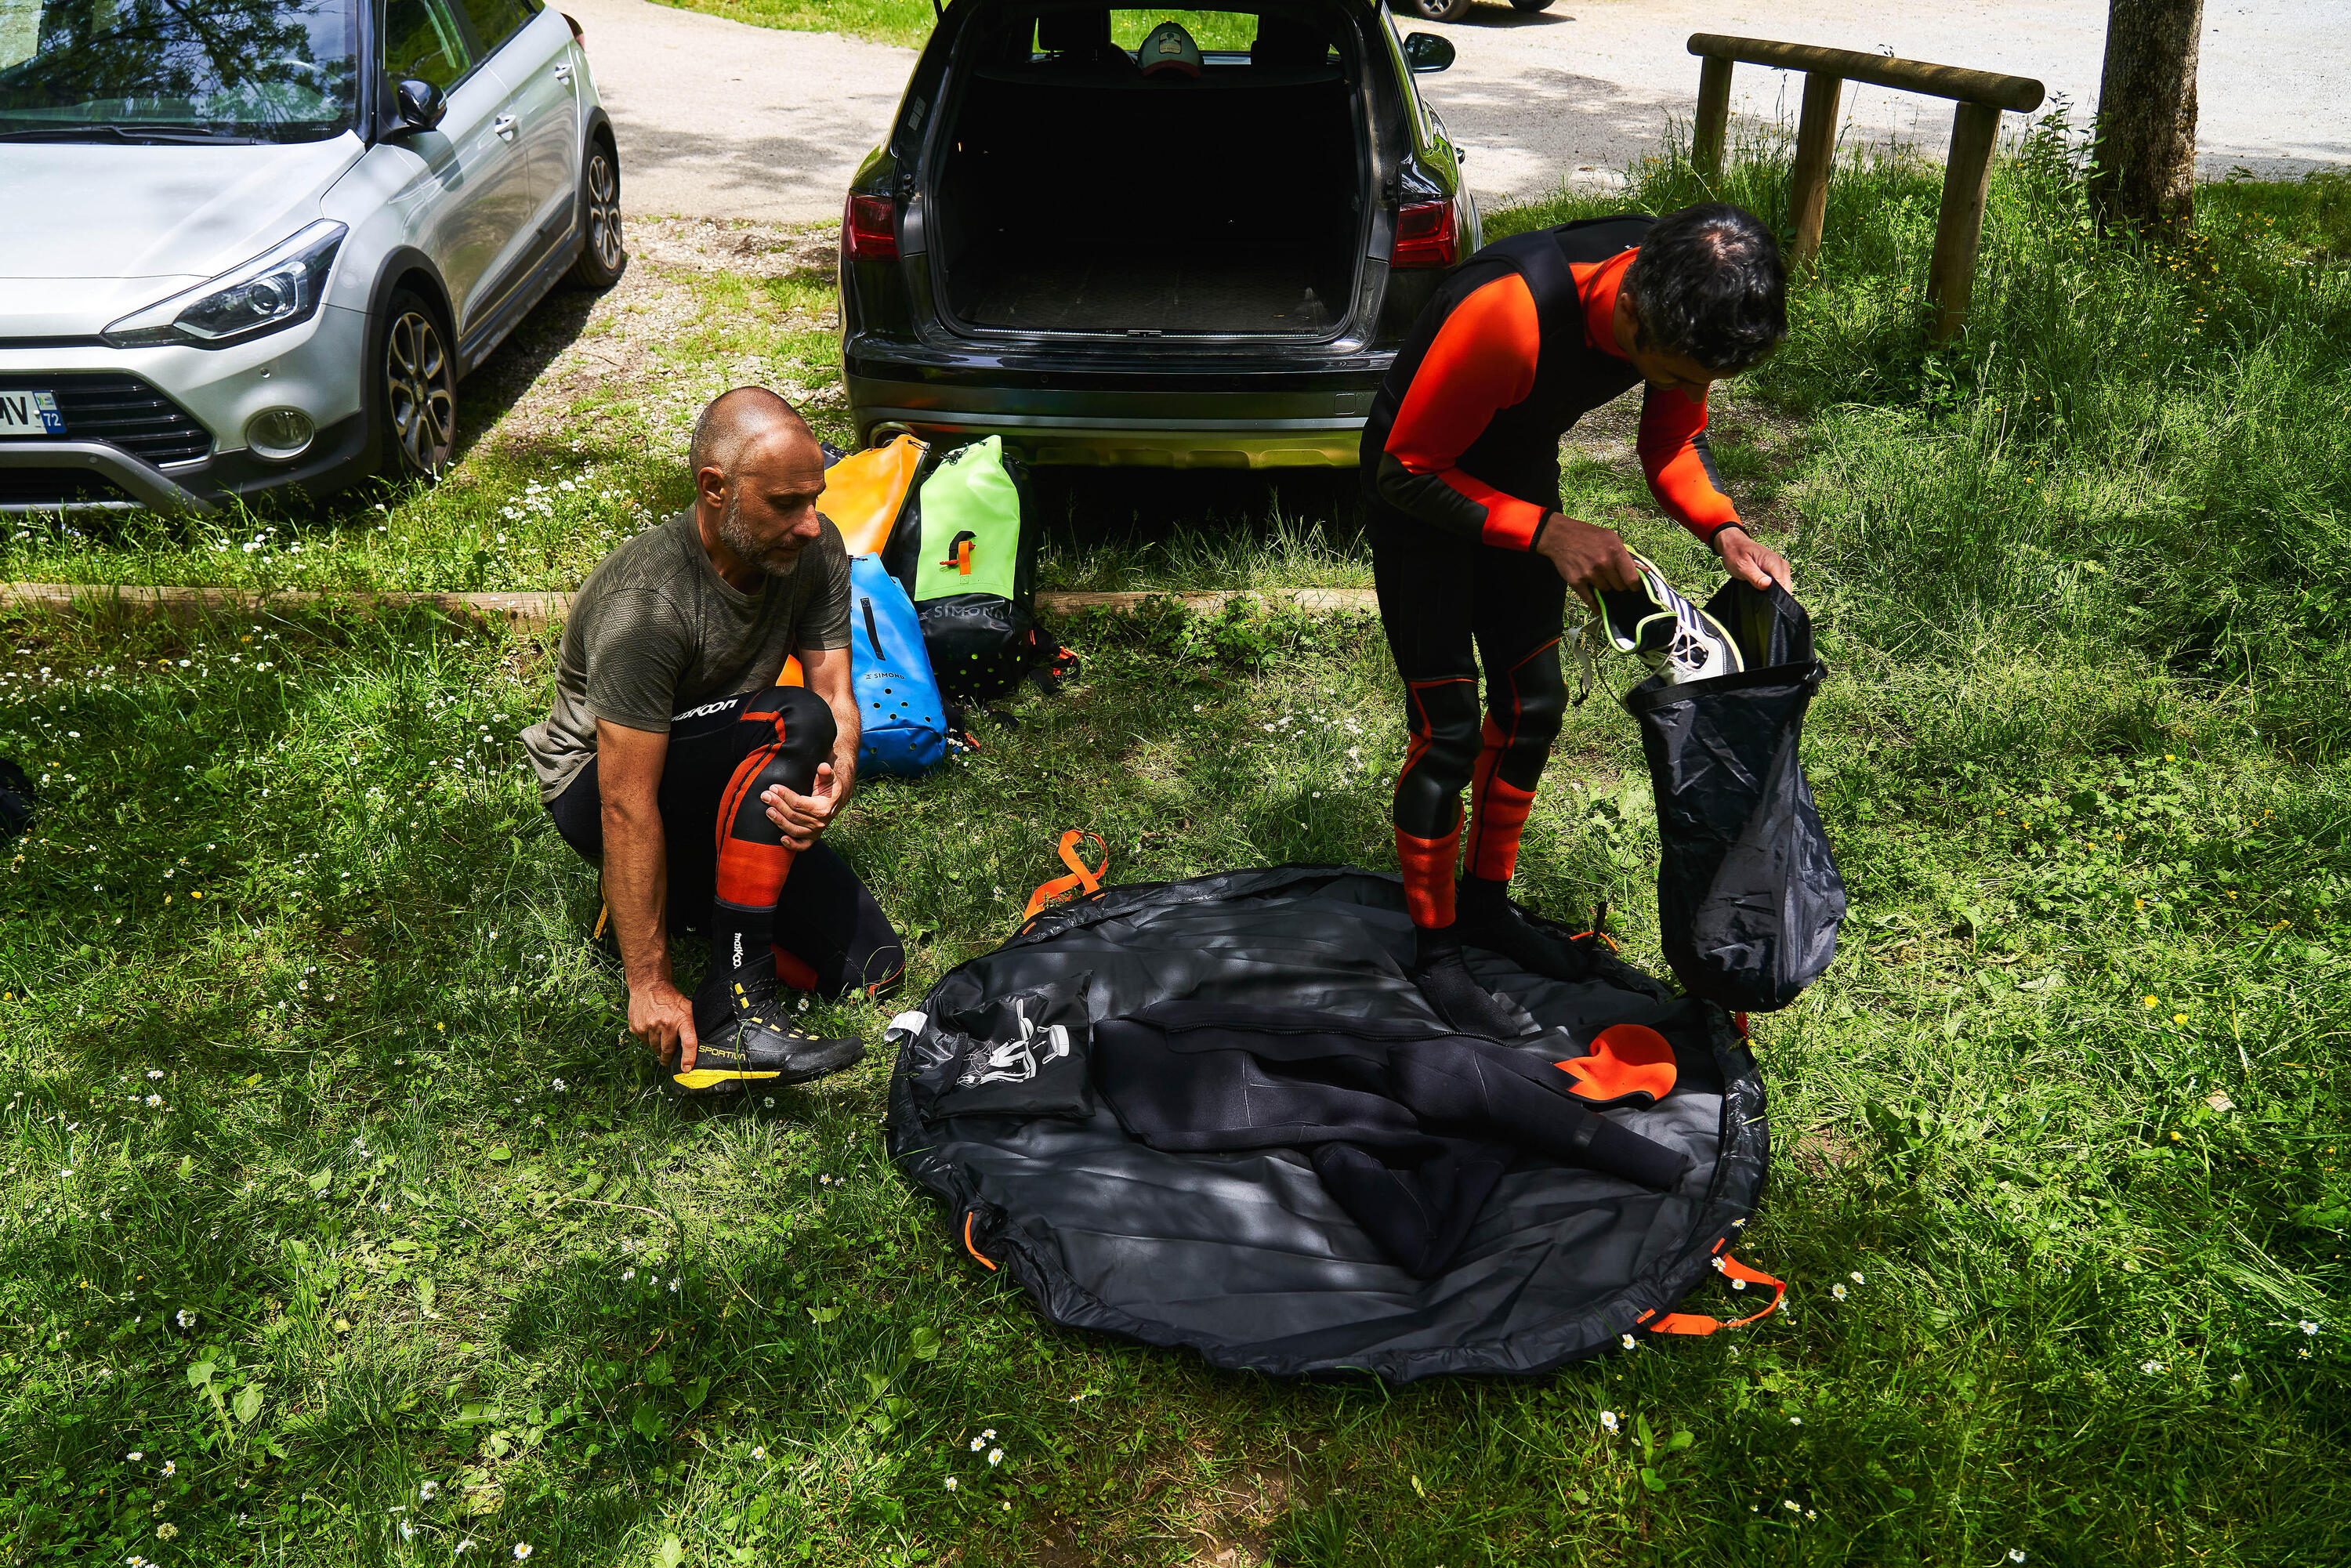 Canyoning gear and wetsuit bag 10/10